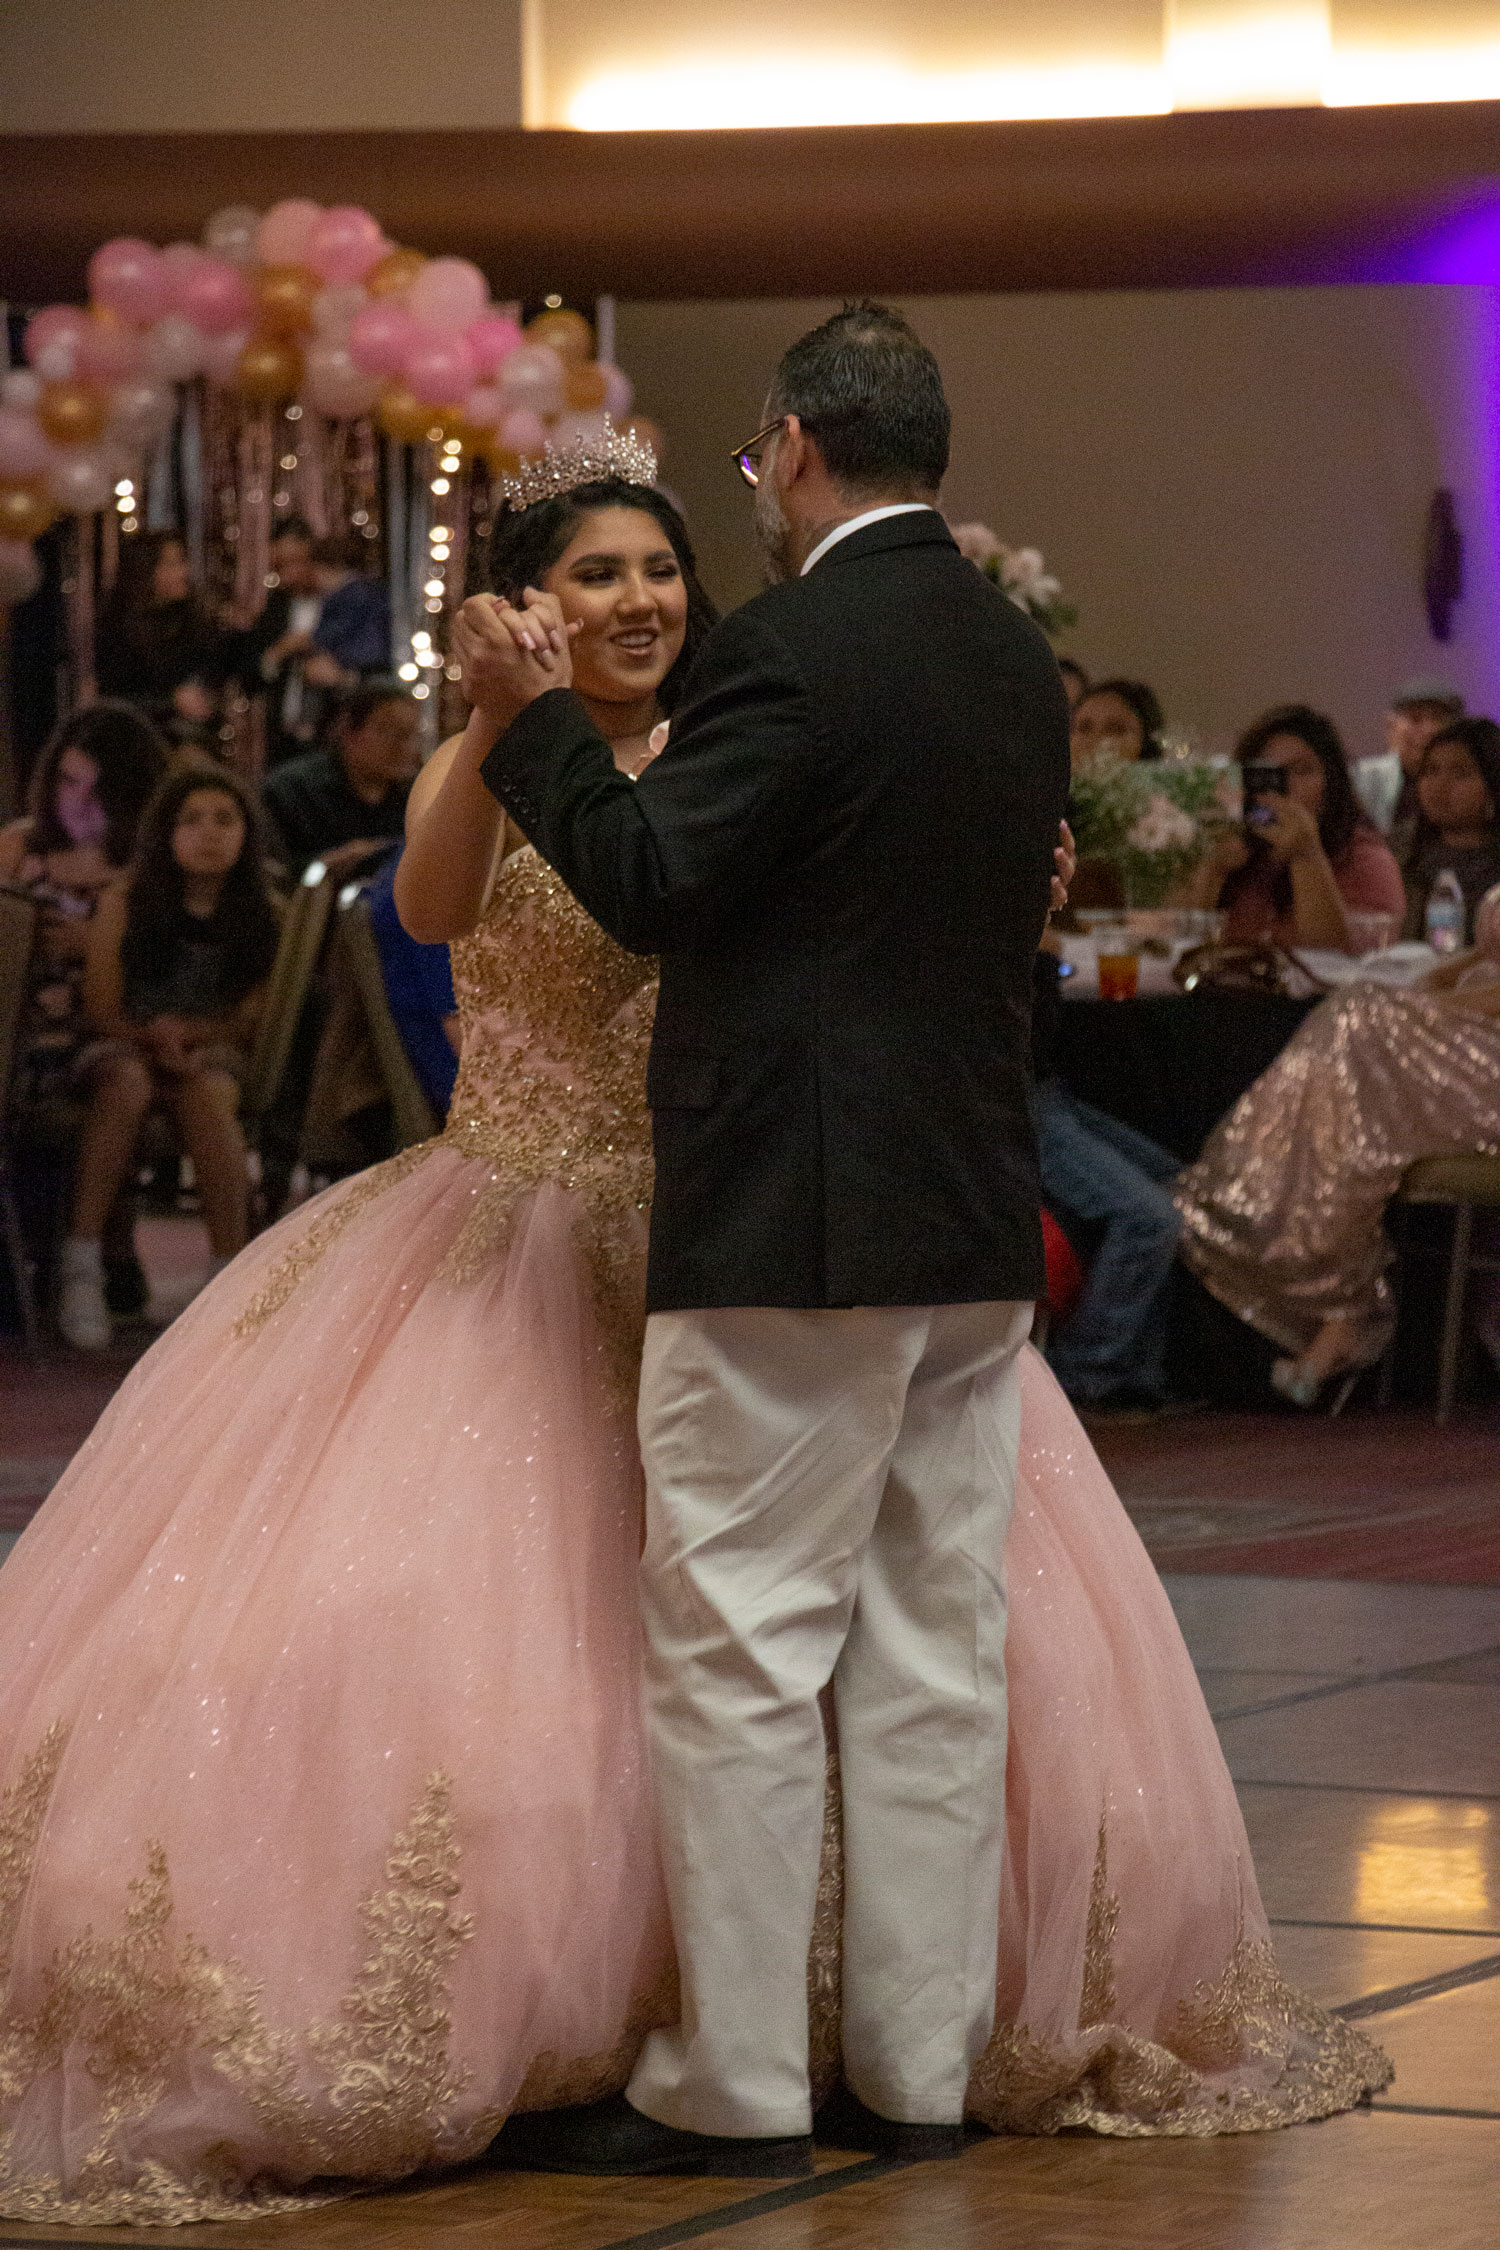 MeLeigha dancing with her father while celebrating her Quince.